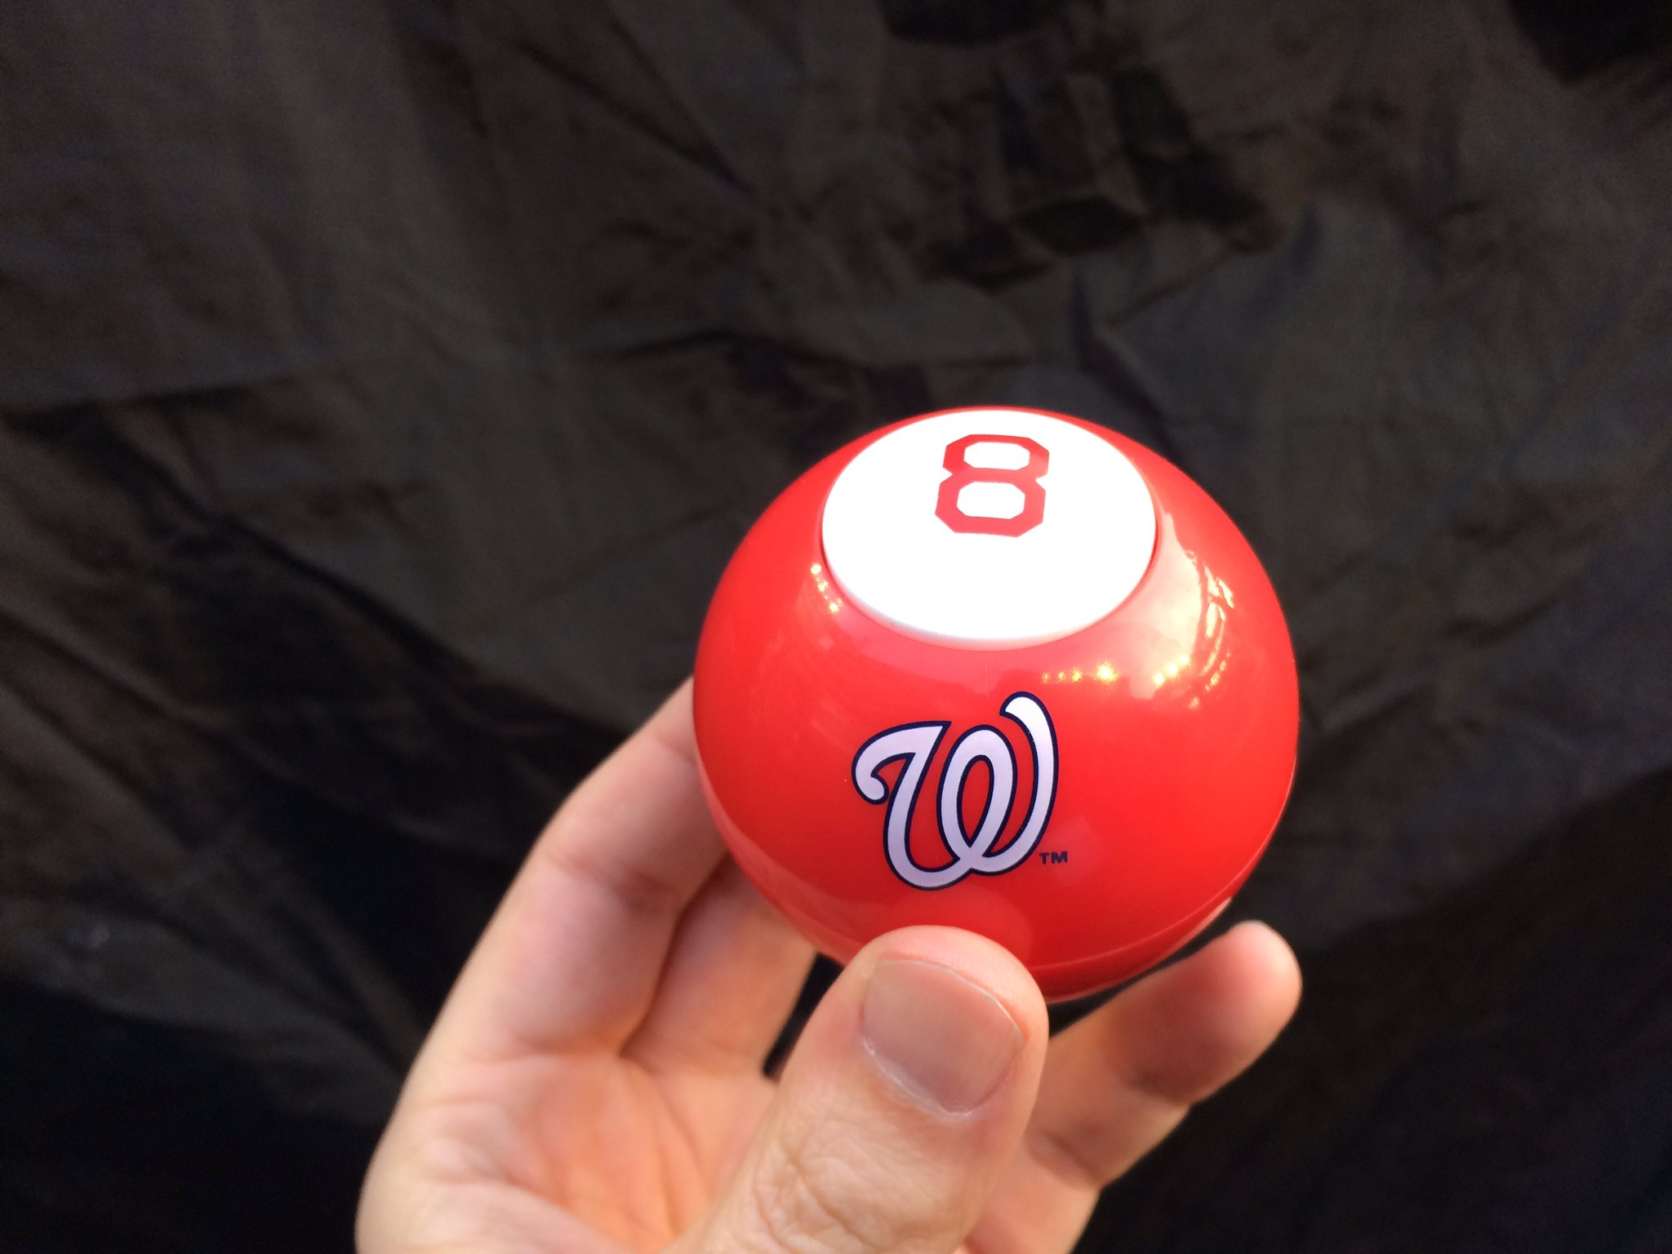 The first 20,000 fans get a special Nationals 2017 magic 8-ball. (WTOP/Nick Iannelli)